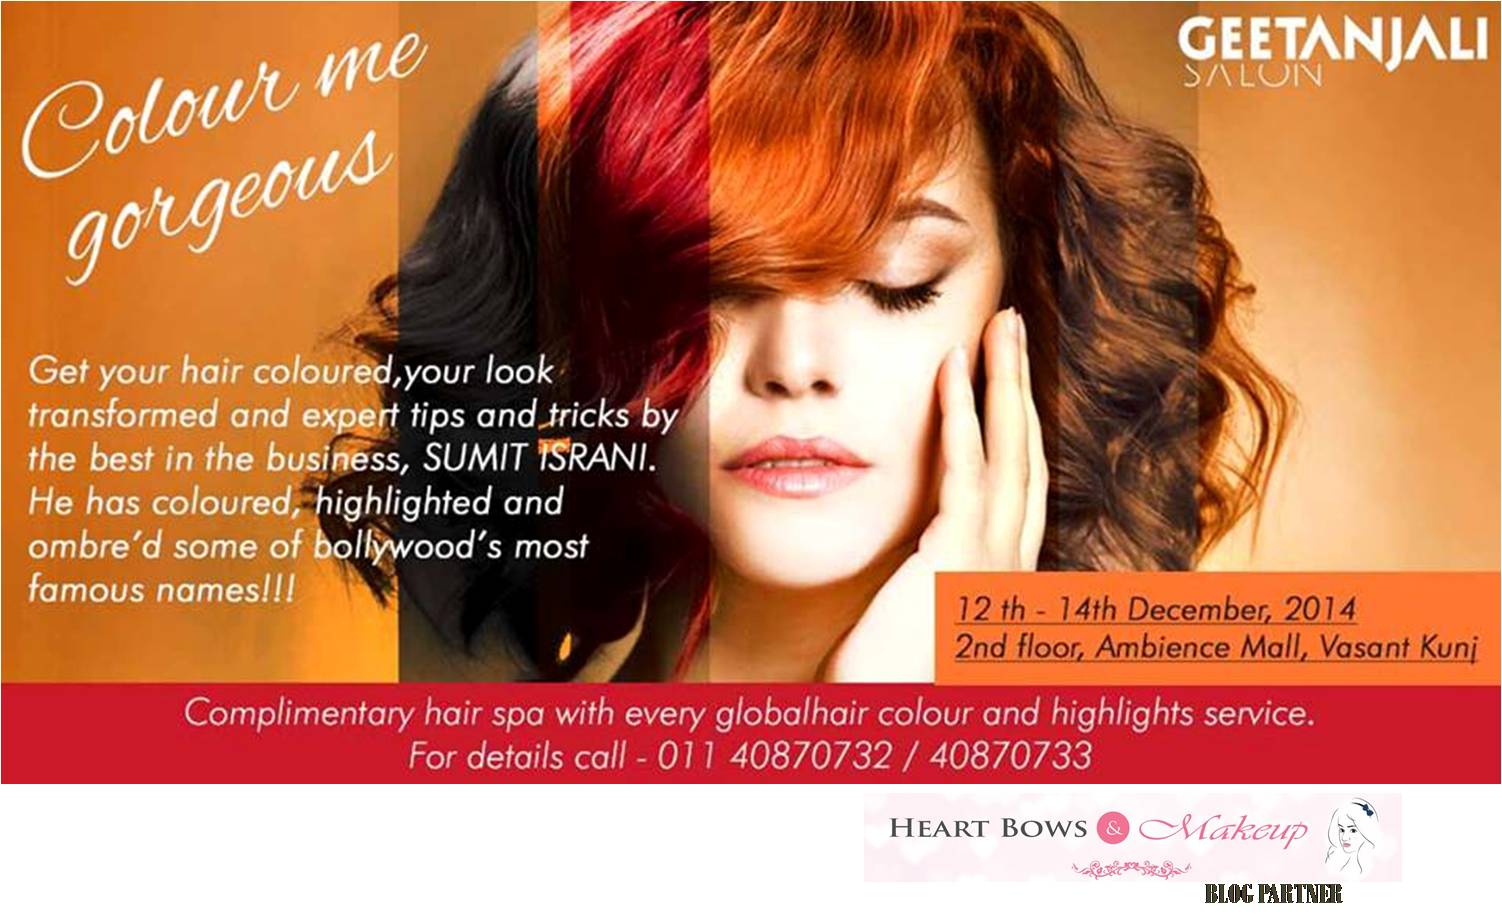 Win a Chance to Color Your Hair Gorgeous With Geetanjali Salon - Heart Bows  & Makeup